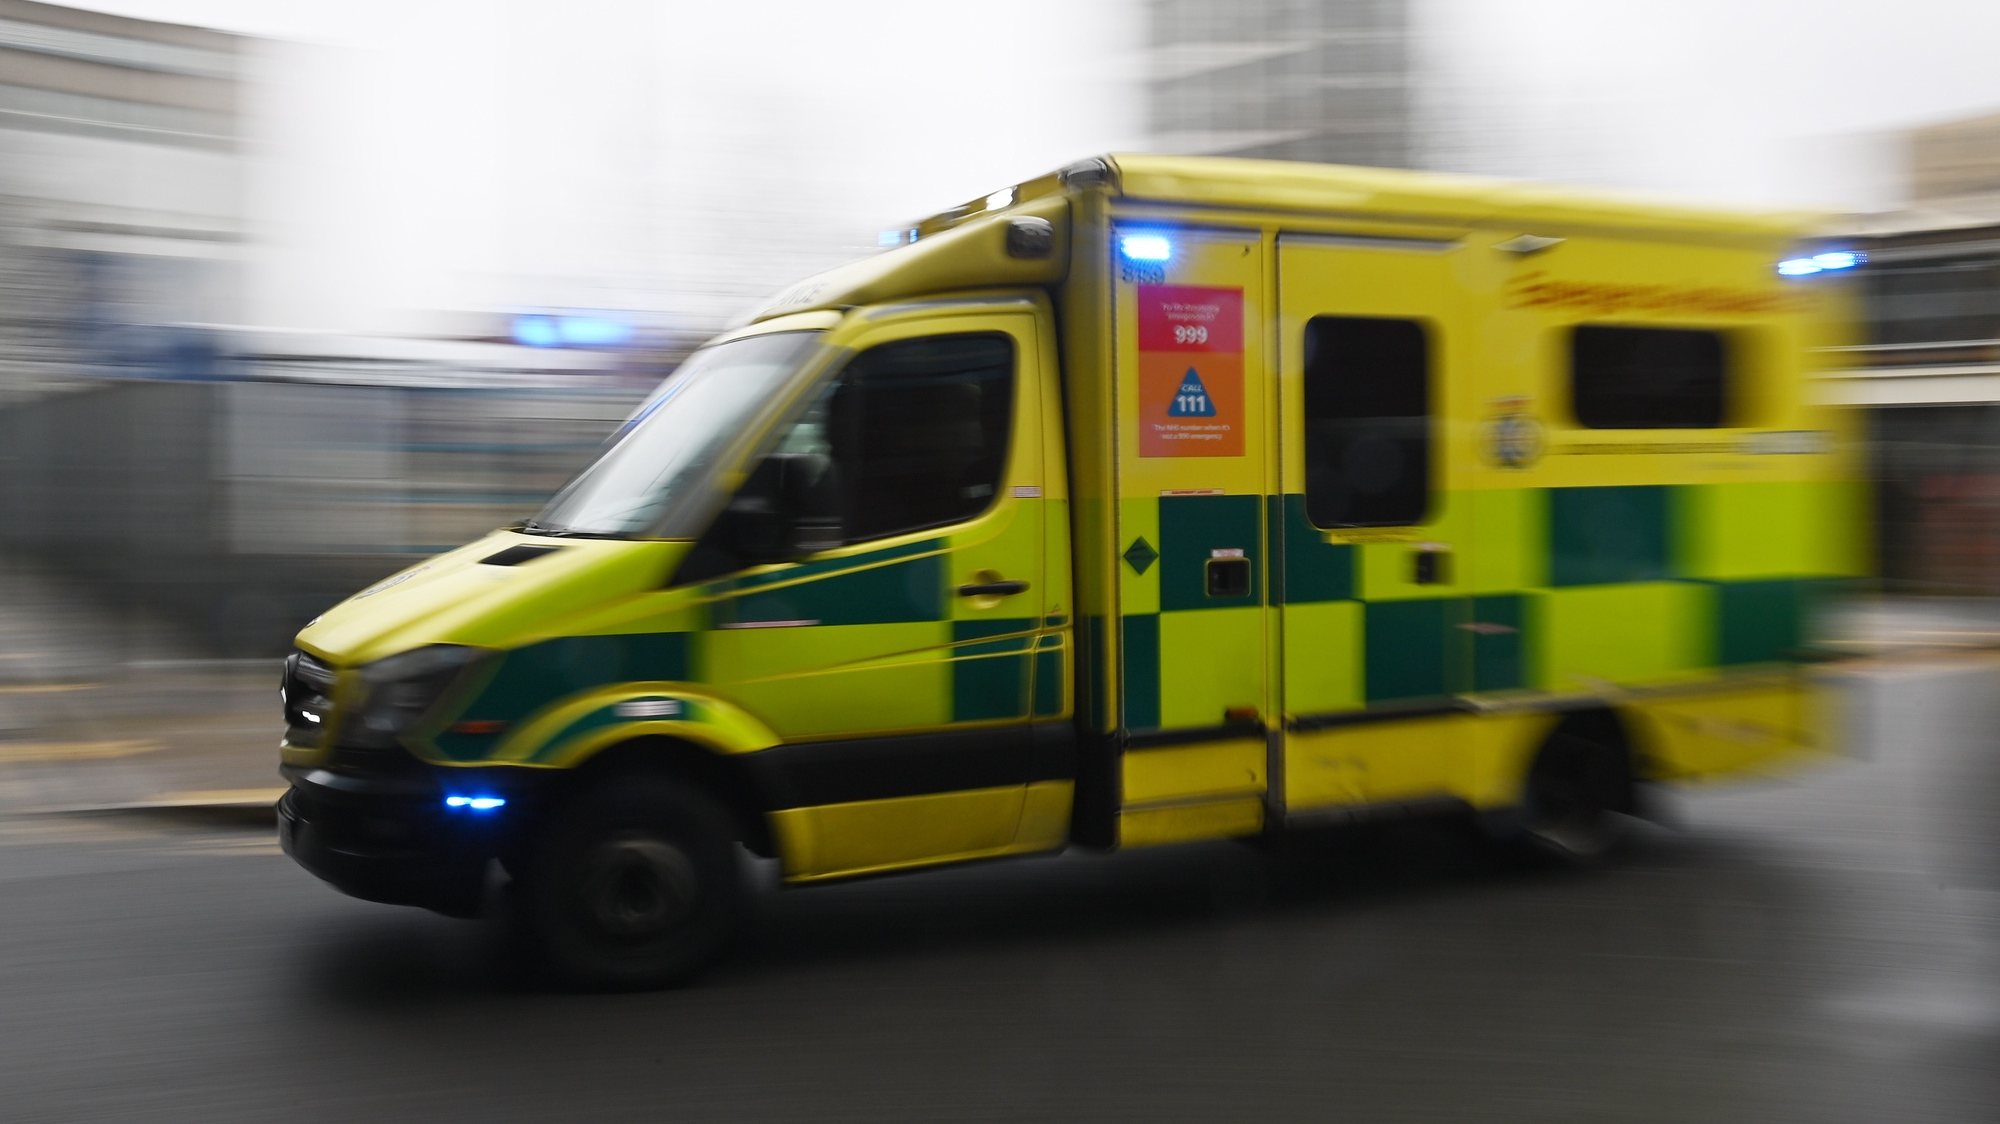 epa08932935 An ambulance arrives at the Royal London Hospital in London, Britain, 12 January 2021. 2020 saw the largest increase in UK deaths in a single year since 1940, according to provisional ONS figures. In 2020, nearly 697,000 deaths were registered, compared with an average of nearly 606,000 each year between 2015 and 2019  EPA/NEIL HALL